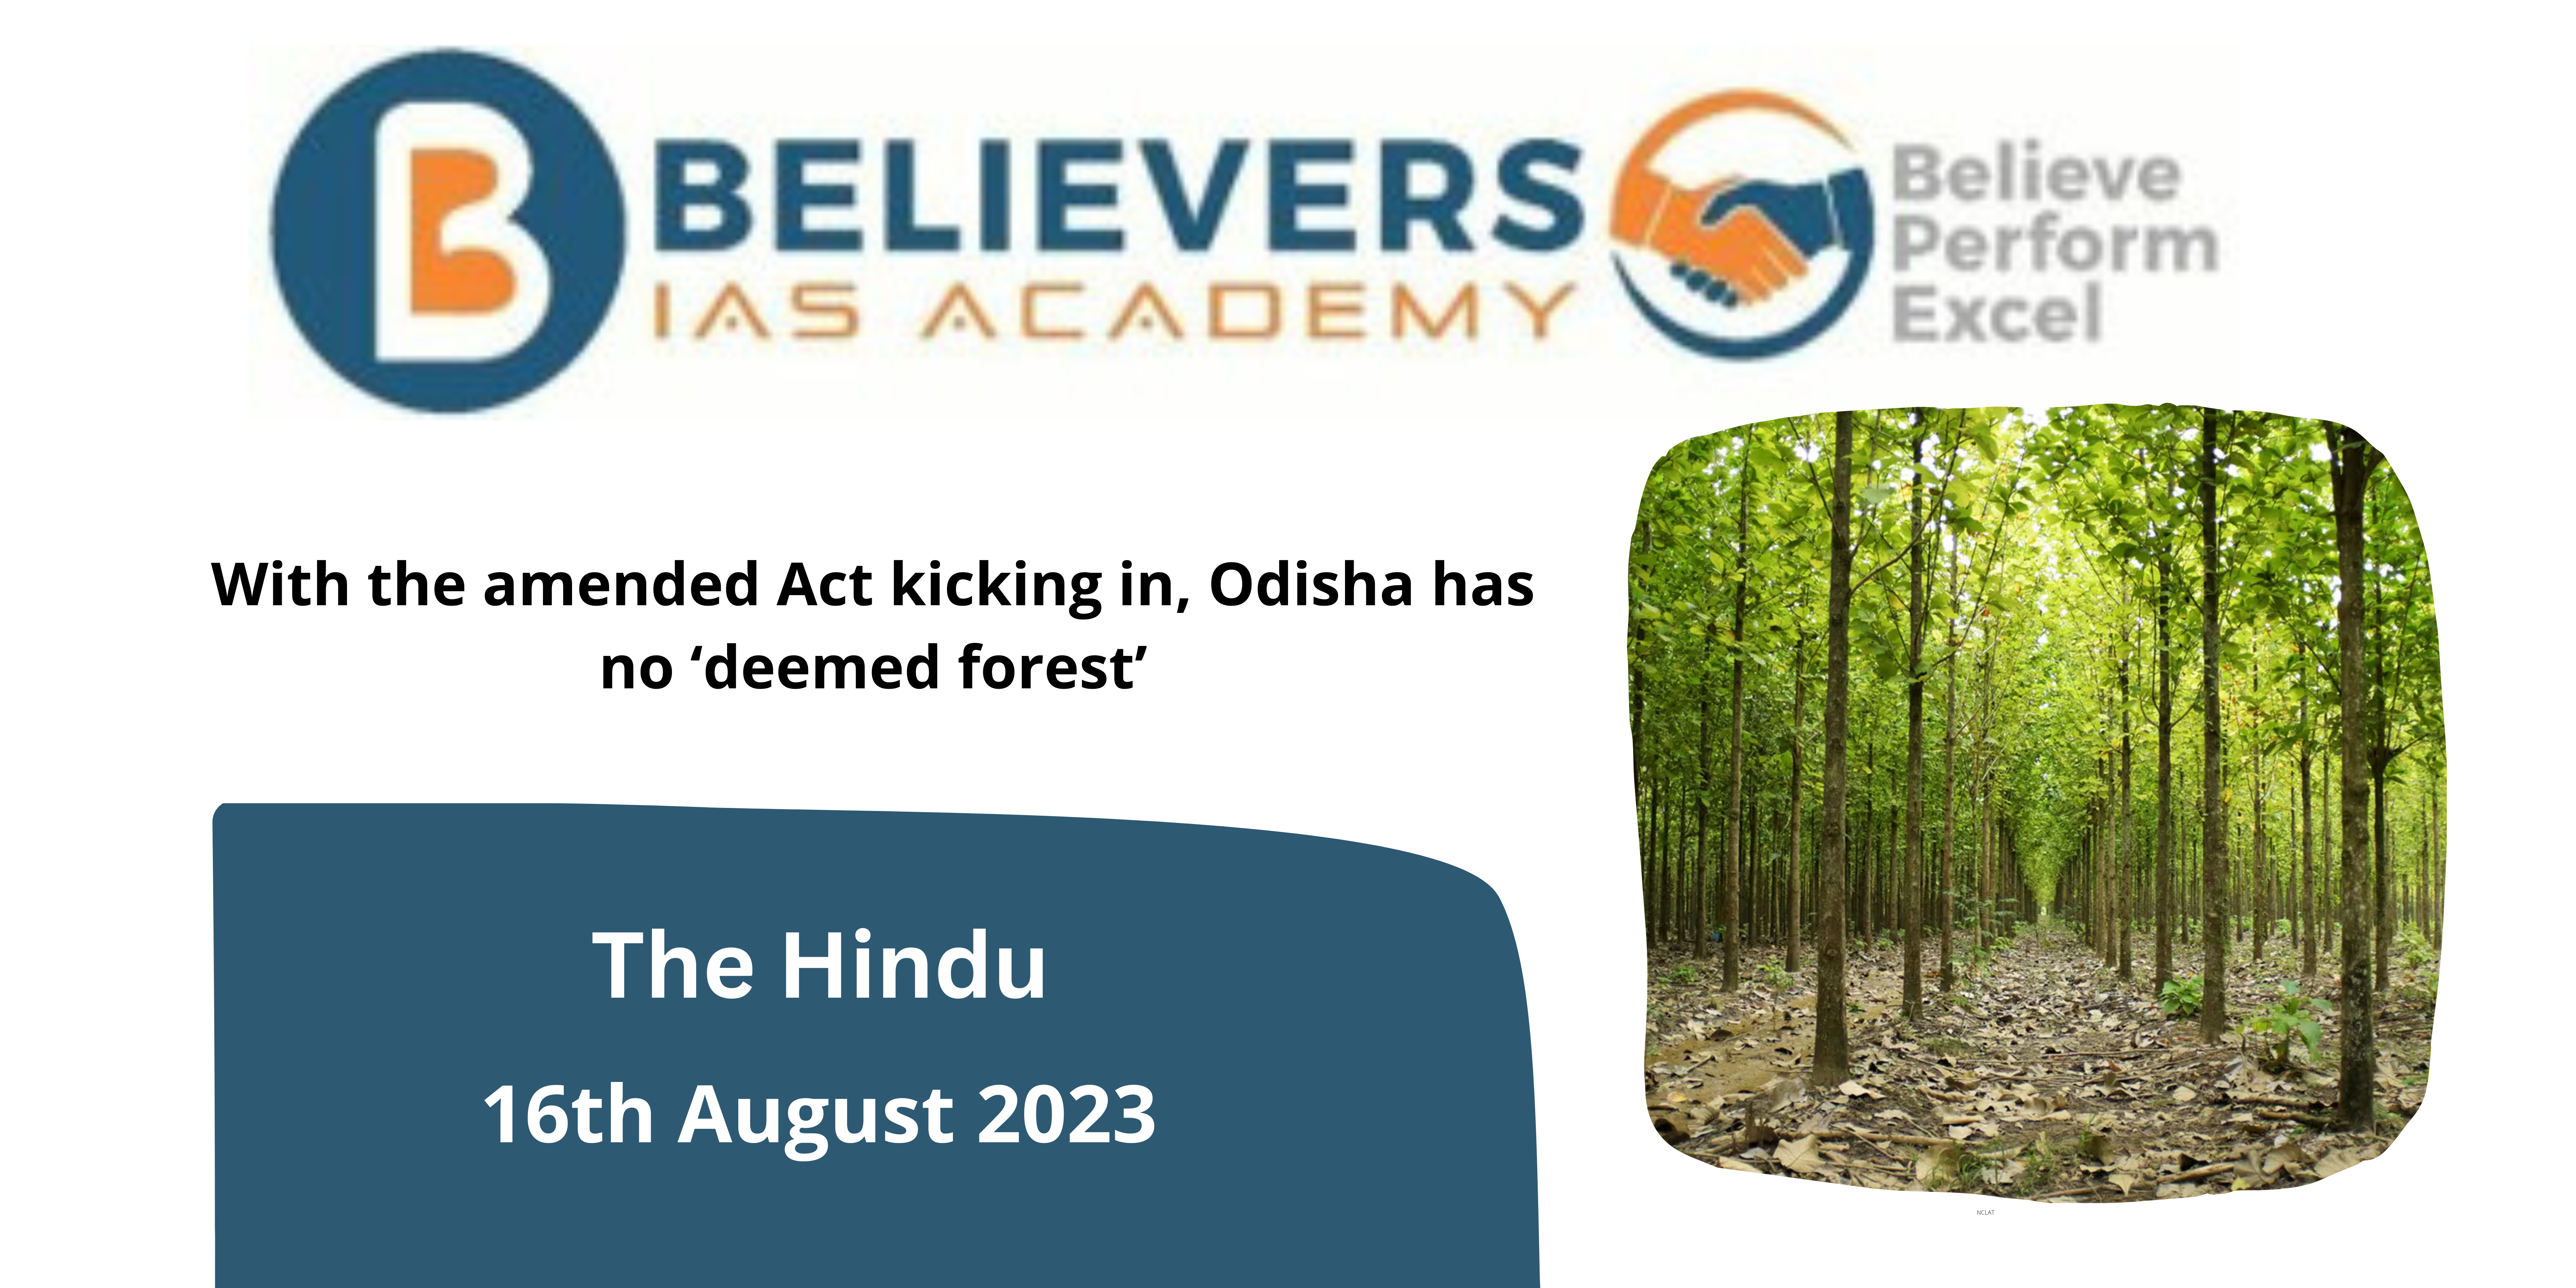 With the amended Act kicking in, Odisha has no ‘deemed forest’